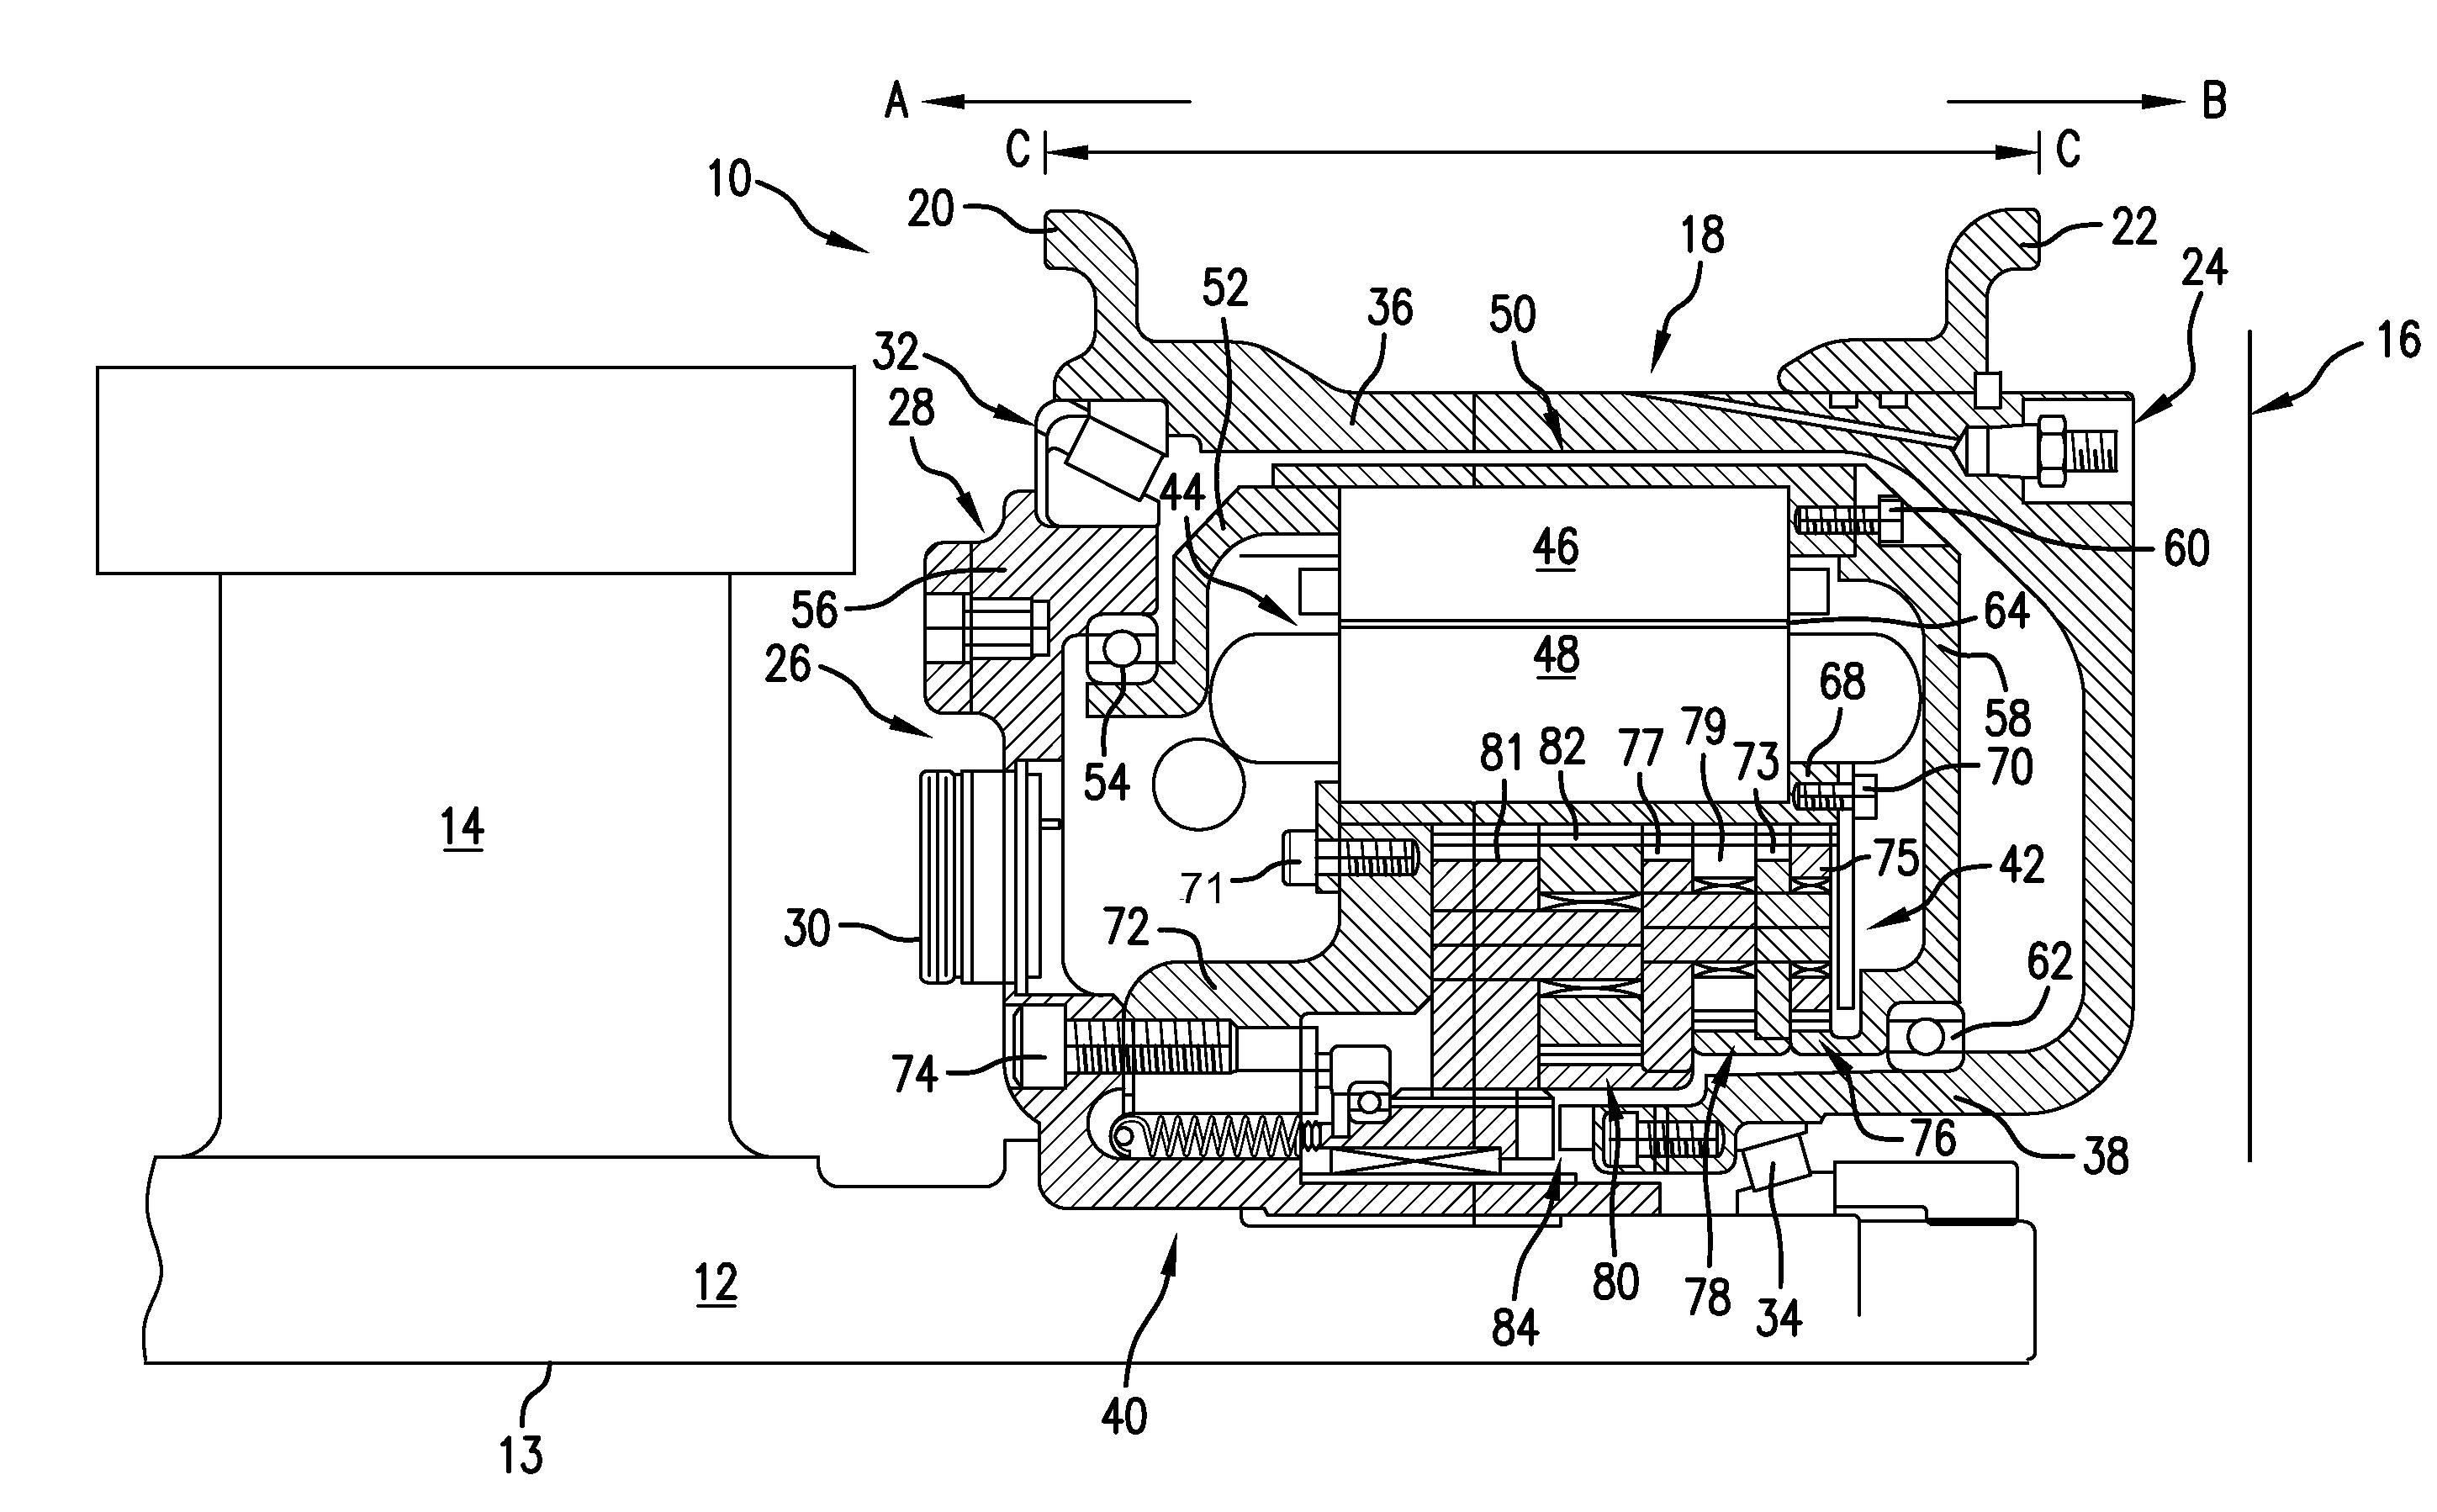 Motor and gearing system for aircraft wheel